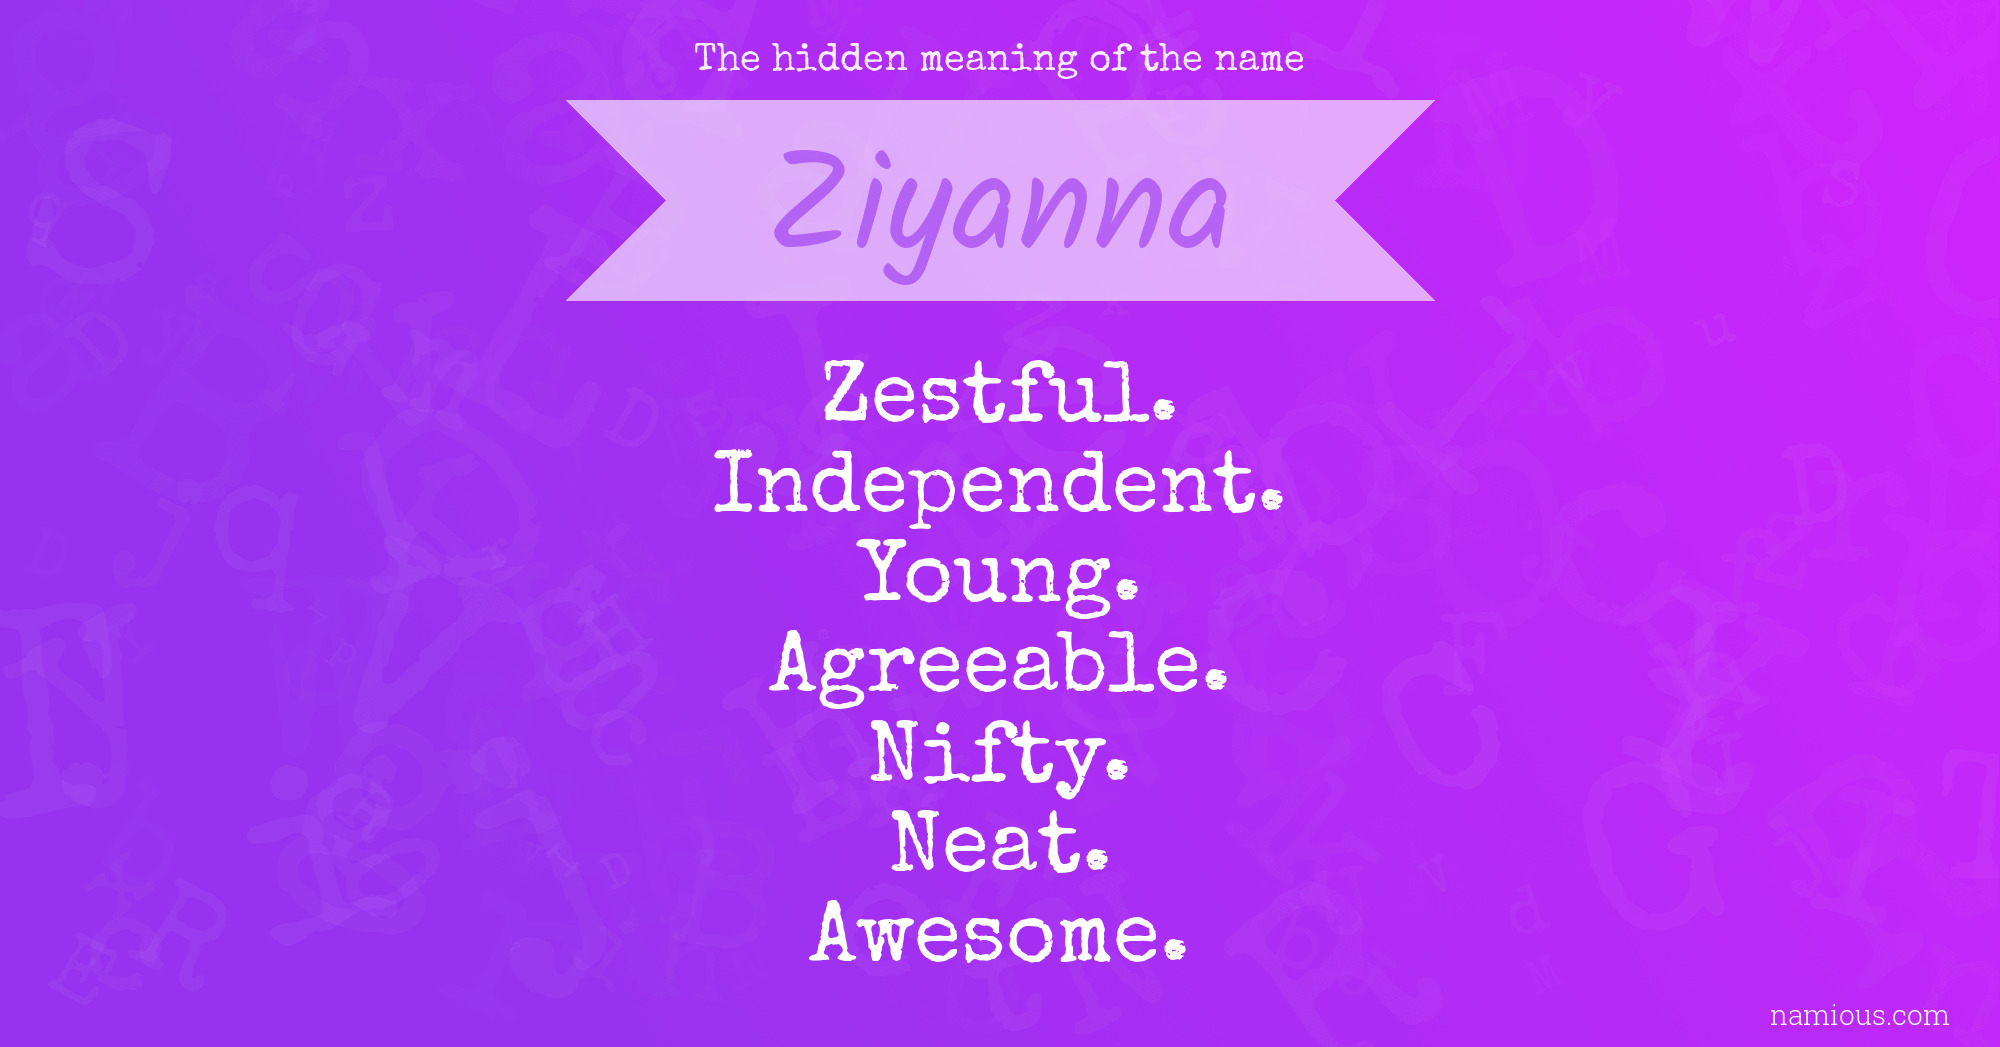 The hidden meaning of the name Ziyanna